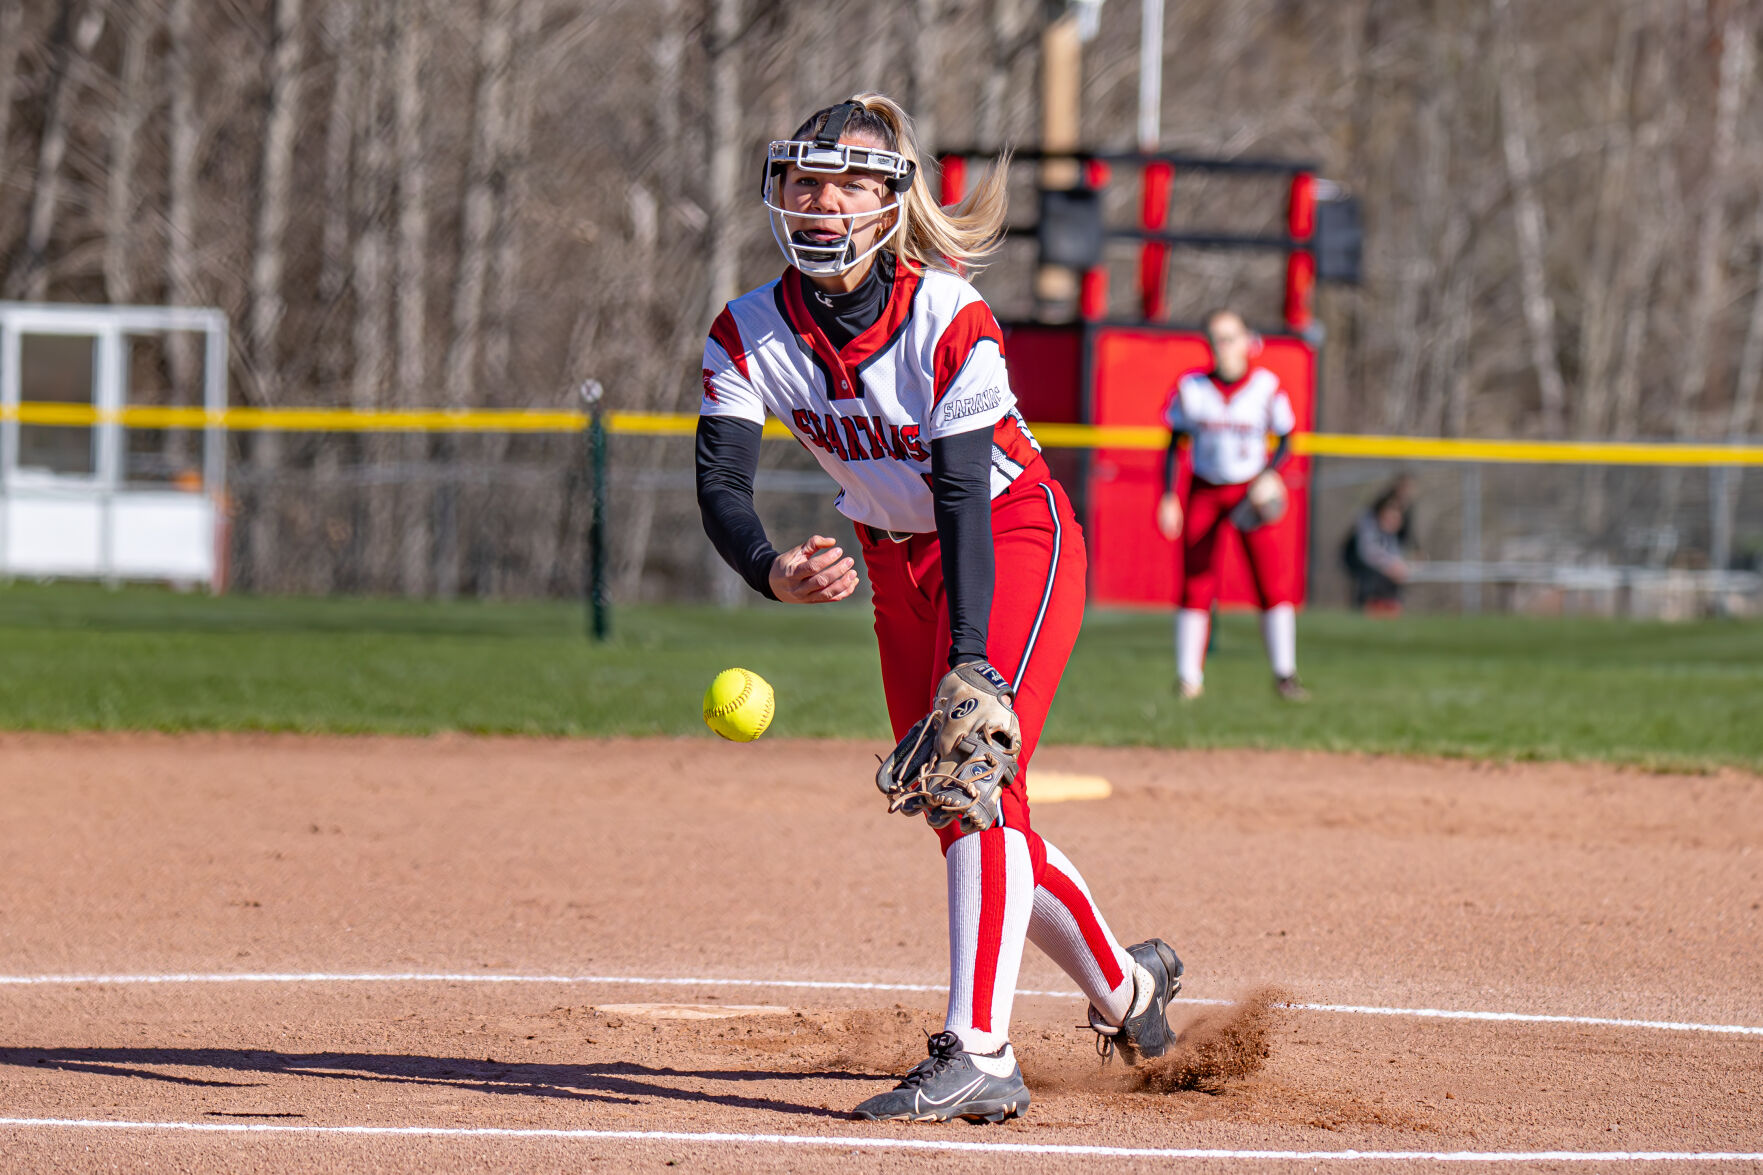 Saranac softball team stays undefeated with impressive win over NCCS